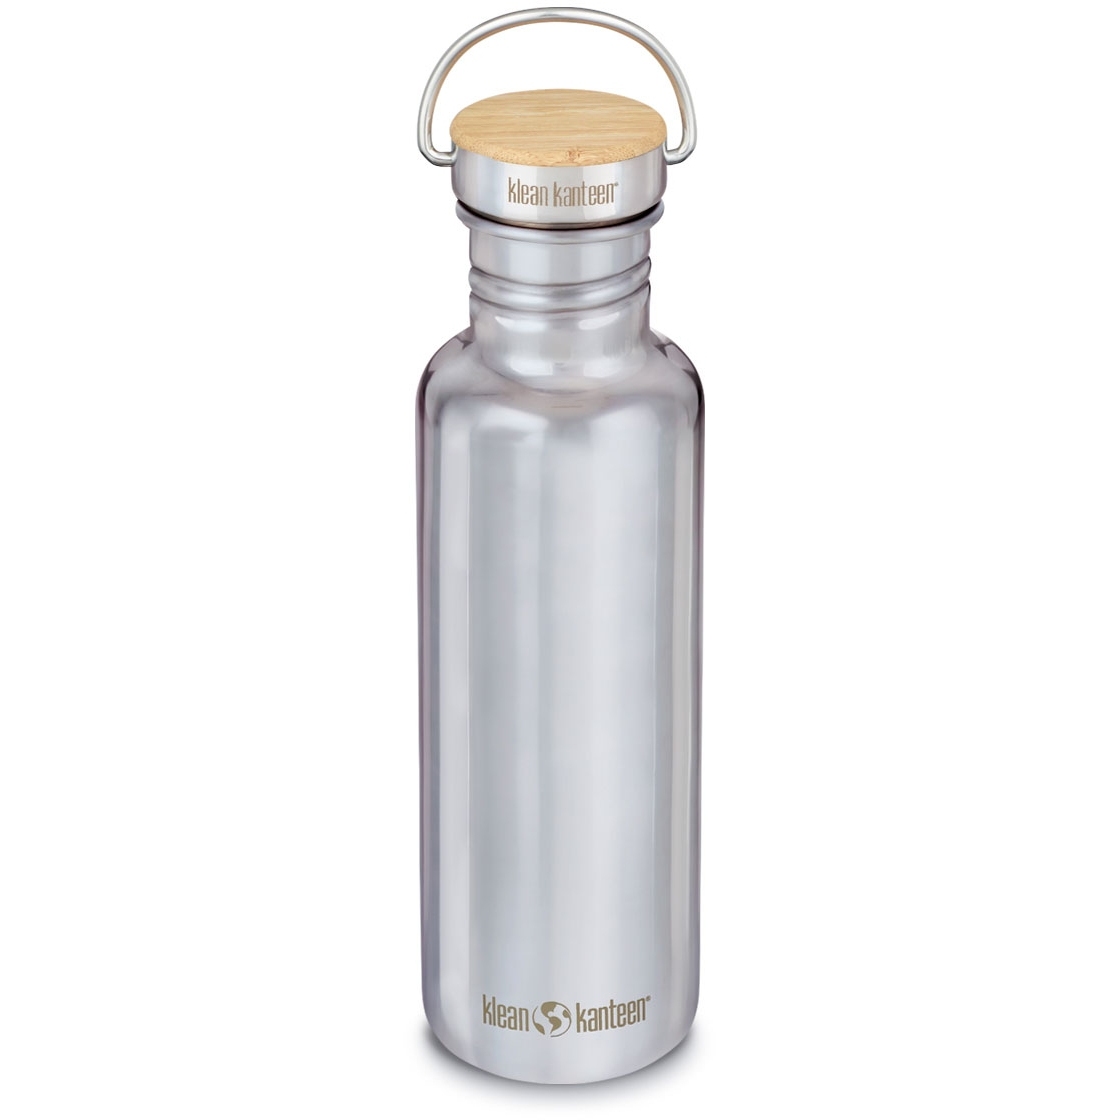 Picture of Klean Kanteen Reflect Bottle with Bamboo Cap 800ml - Mirrored Stainless